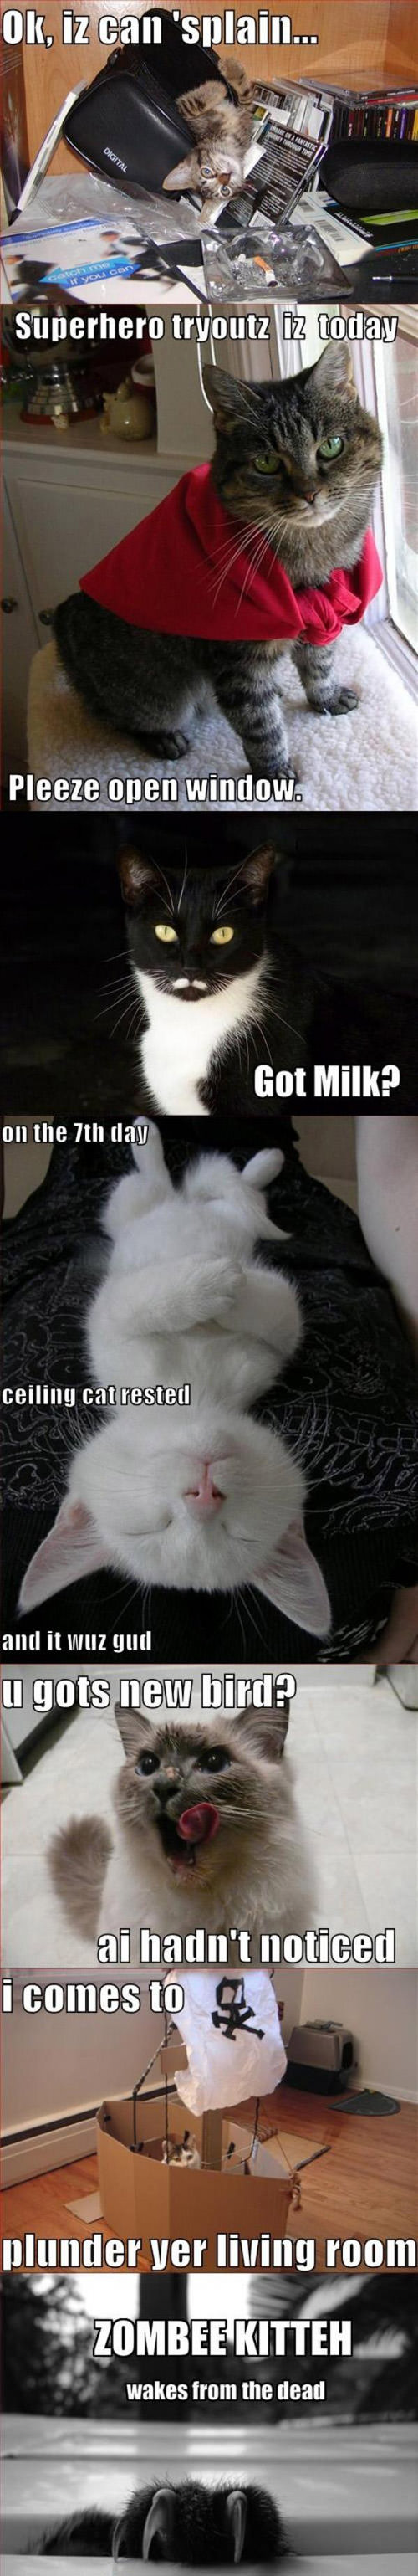 Another LolCat Compilation funny picture